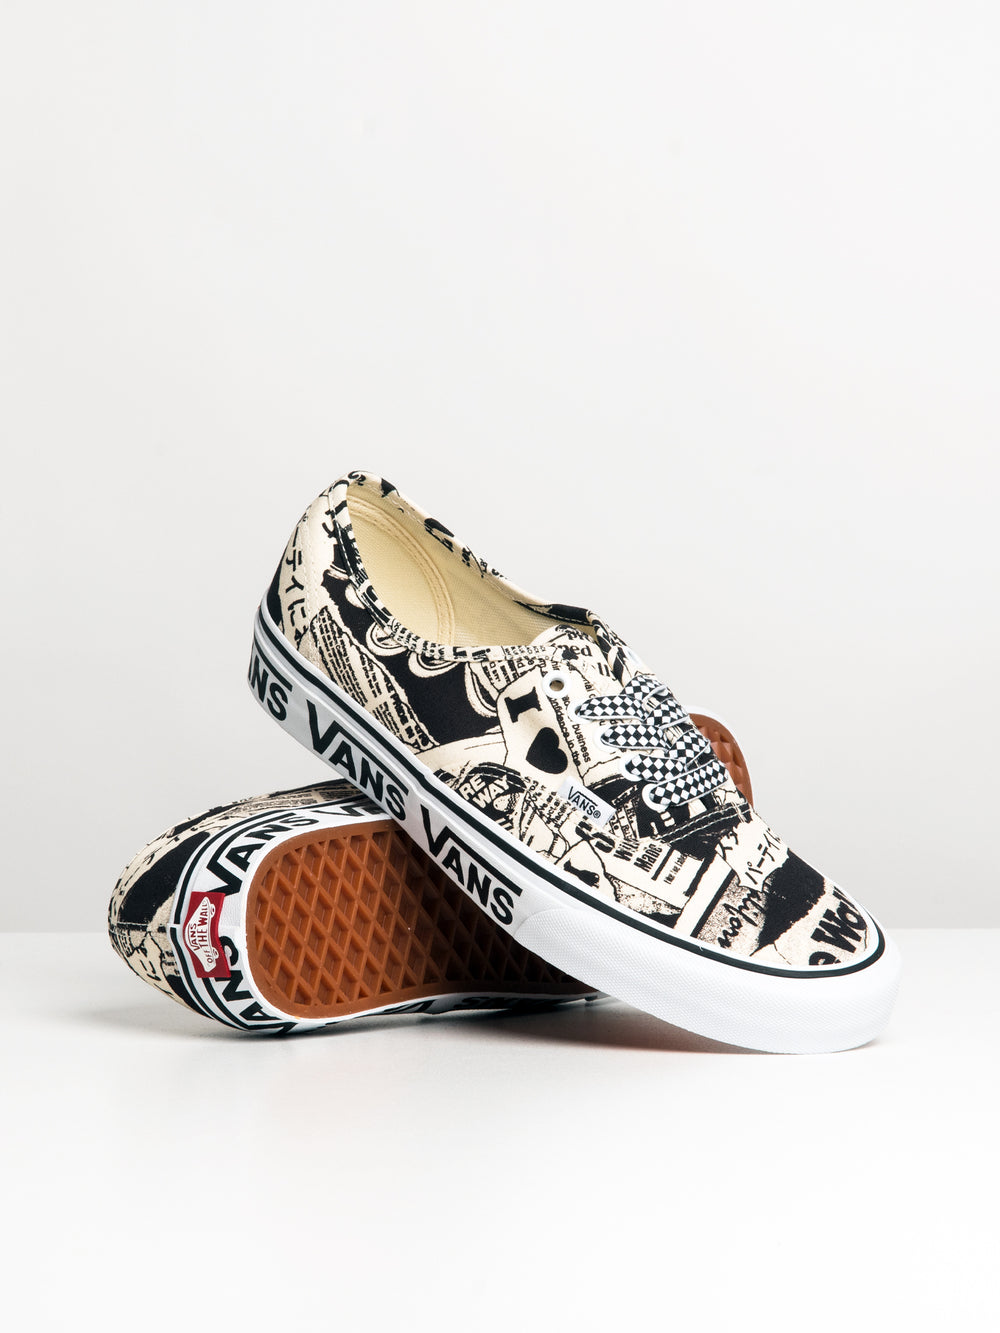 MENS AUTHENTIC - VANS COLLAGE  Boathouse Footwear Collective